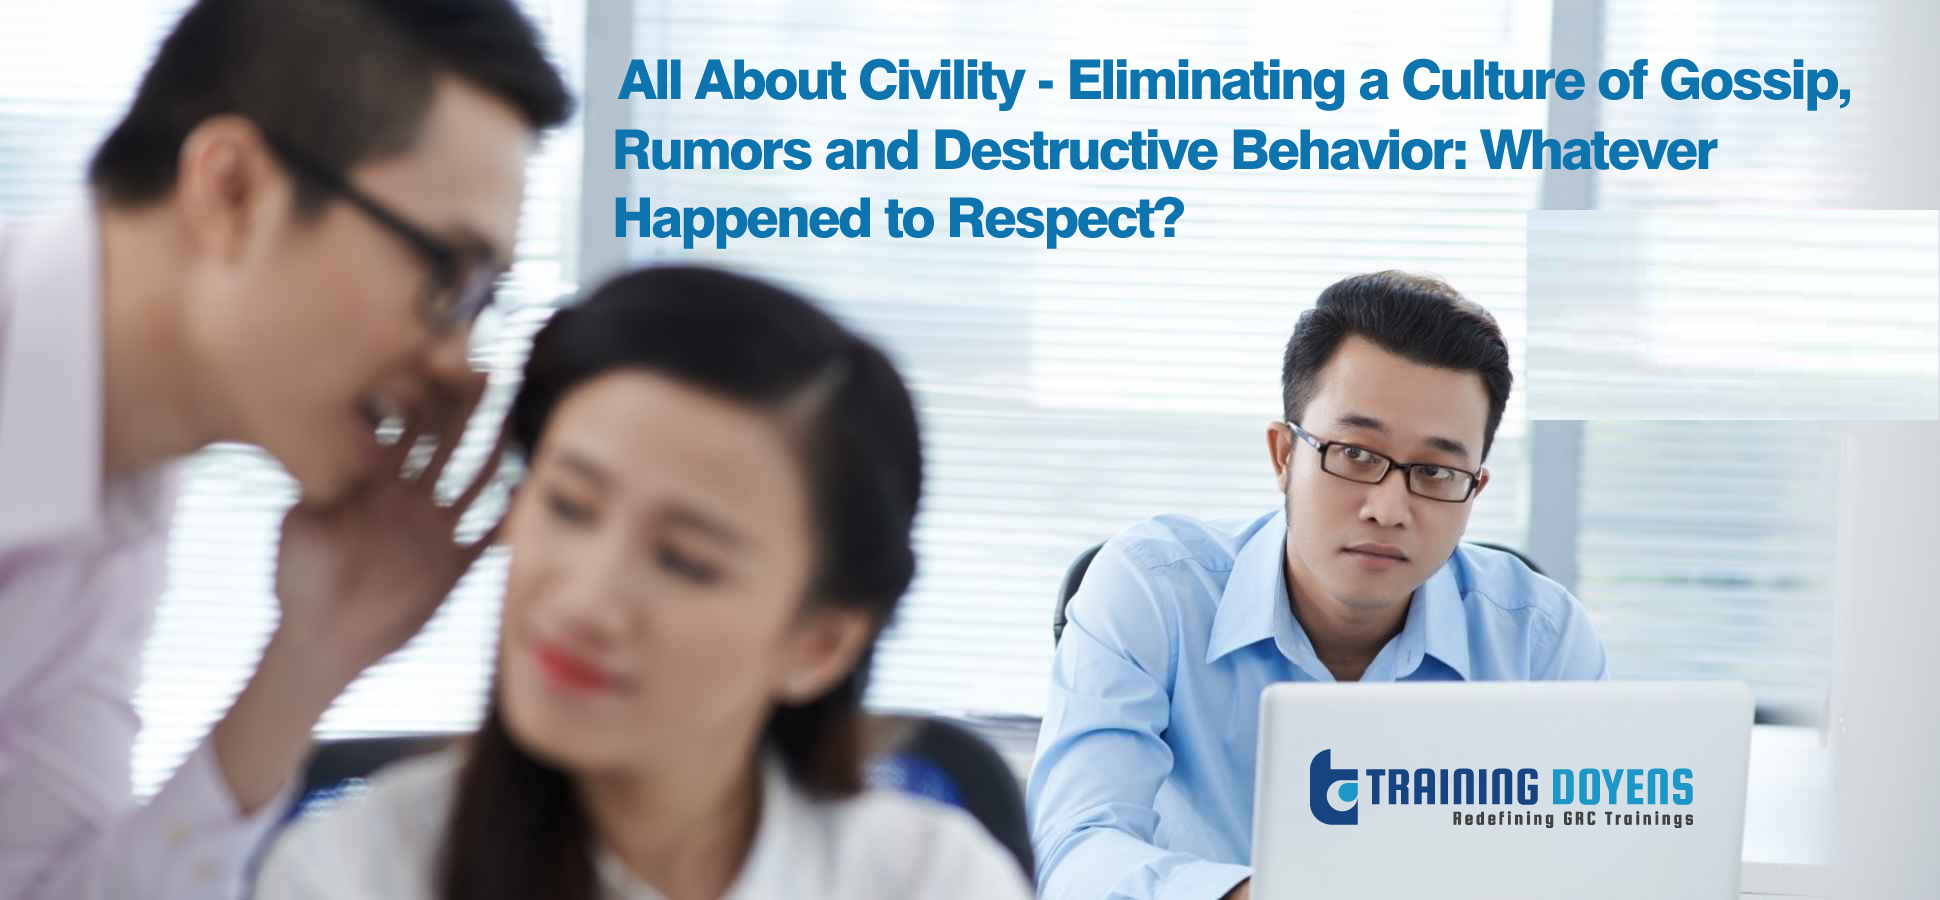 Online Webinar on All About Civility - Eliminating a Culture of Gossip, Rumors and Destructive Behavior: Whatever Happened to Respect?, Denver, Colorado, United States